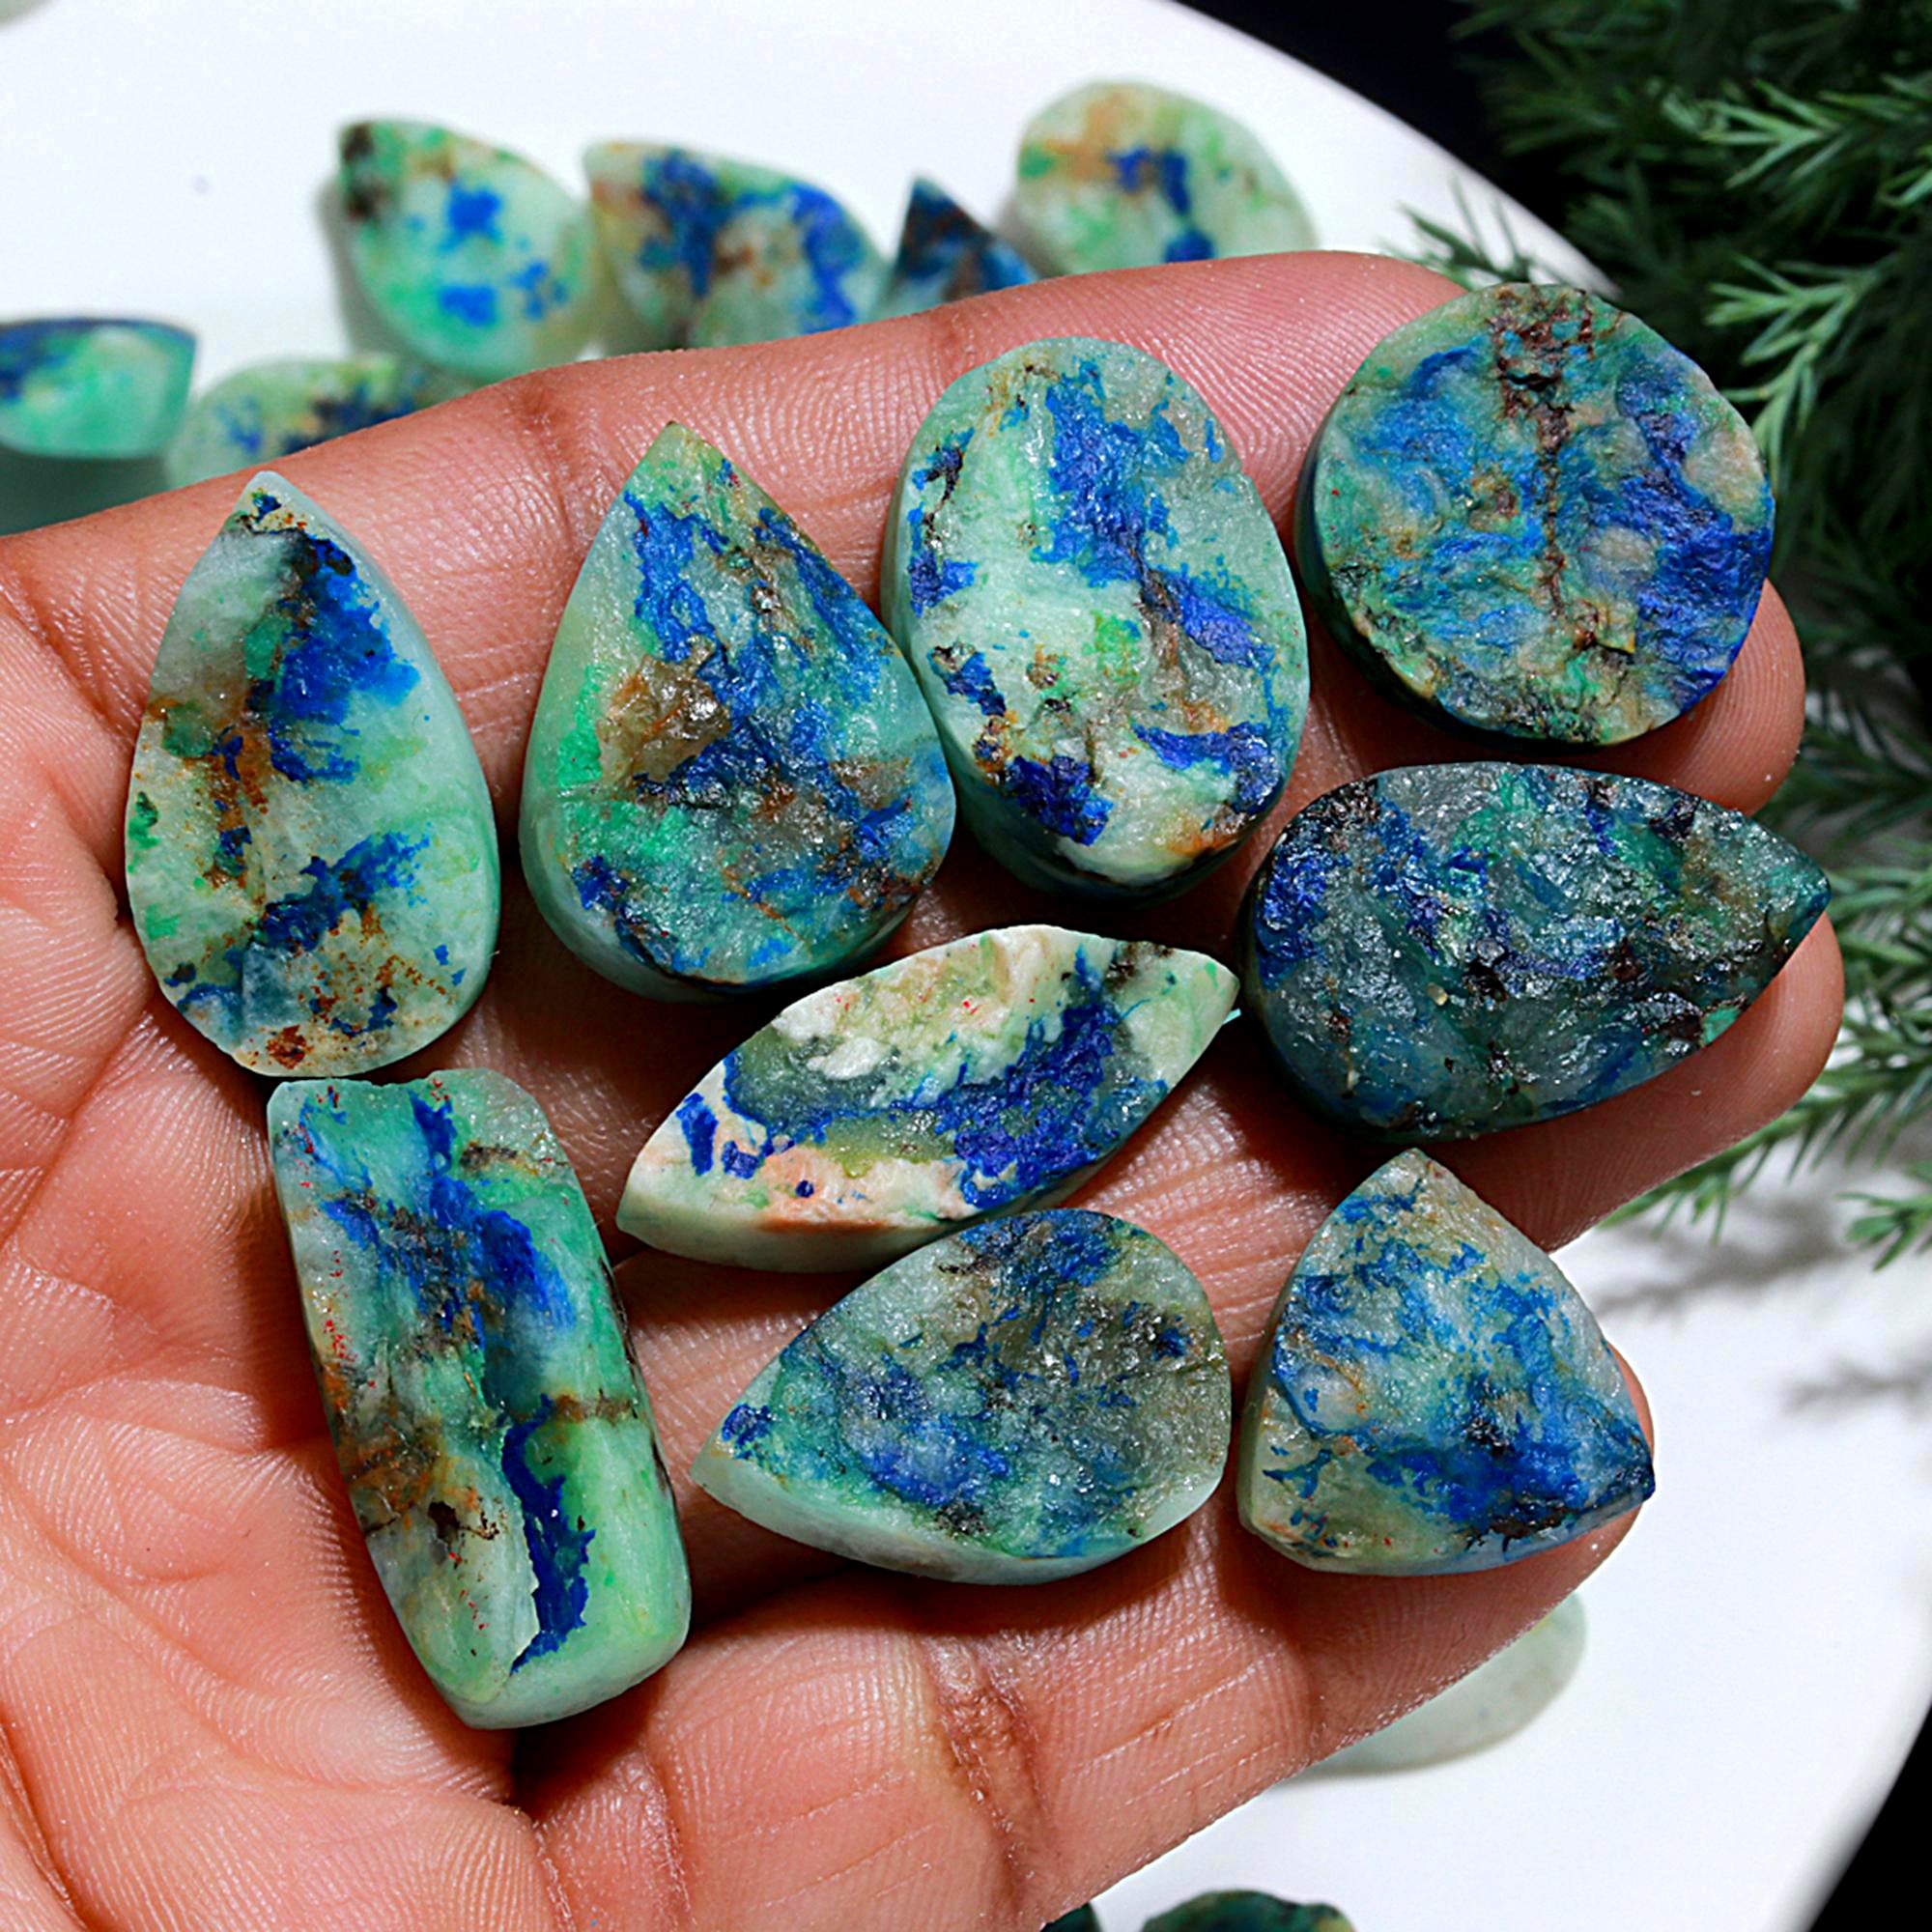 99 Pcs 1110.Cts Natural Azurite Druzy Unpolished Loose Cabochon Gemstone For Jewelry Wholesale Lot Size 27x12 14x13mm#1172